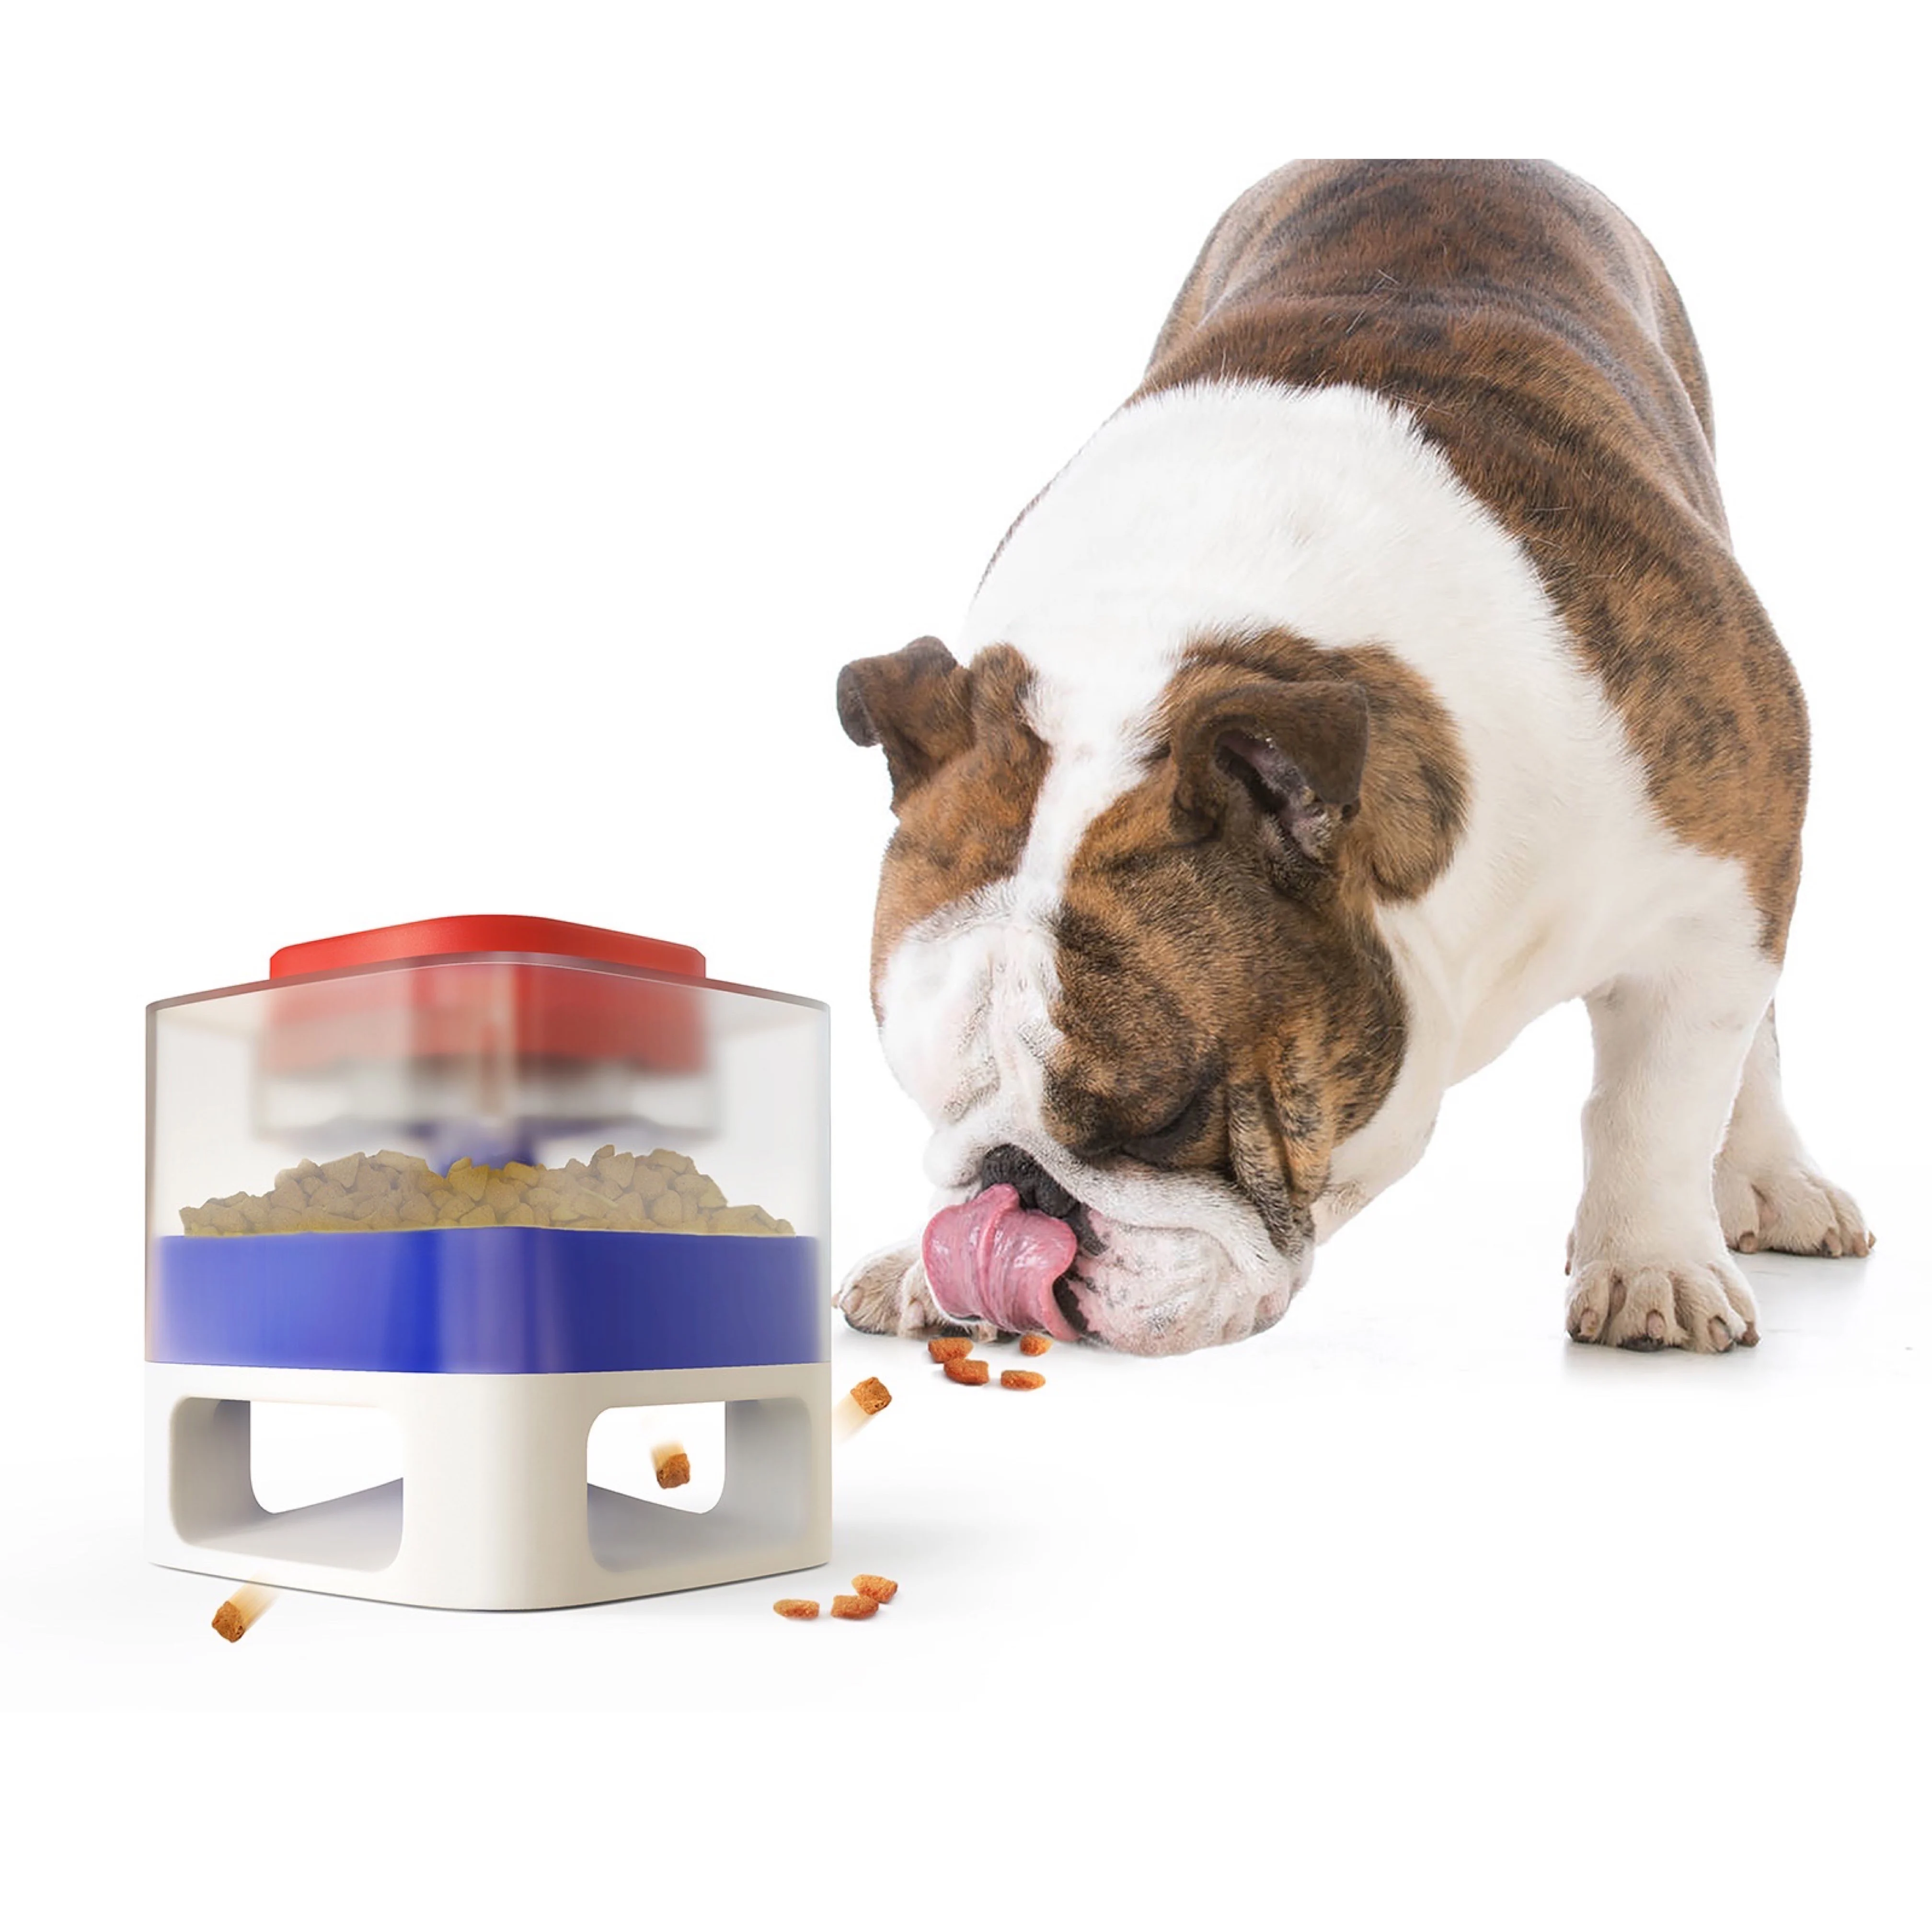 

Dog Automatic Feeder Treat Toys, Interactive Pet Slow Food Dispenser for Small Medium Large Dogs automatic dog feed machine, White